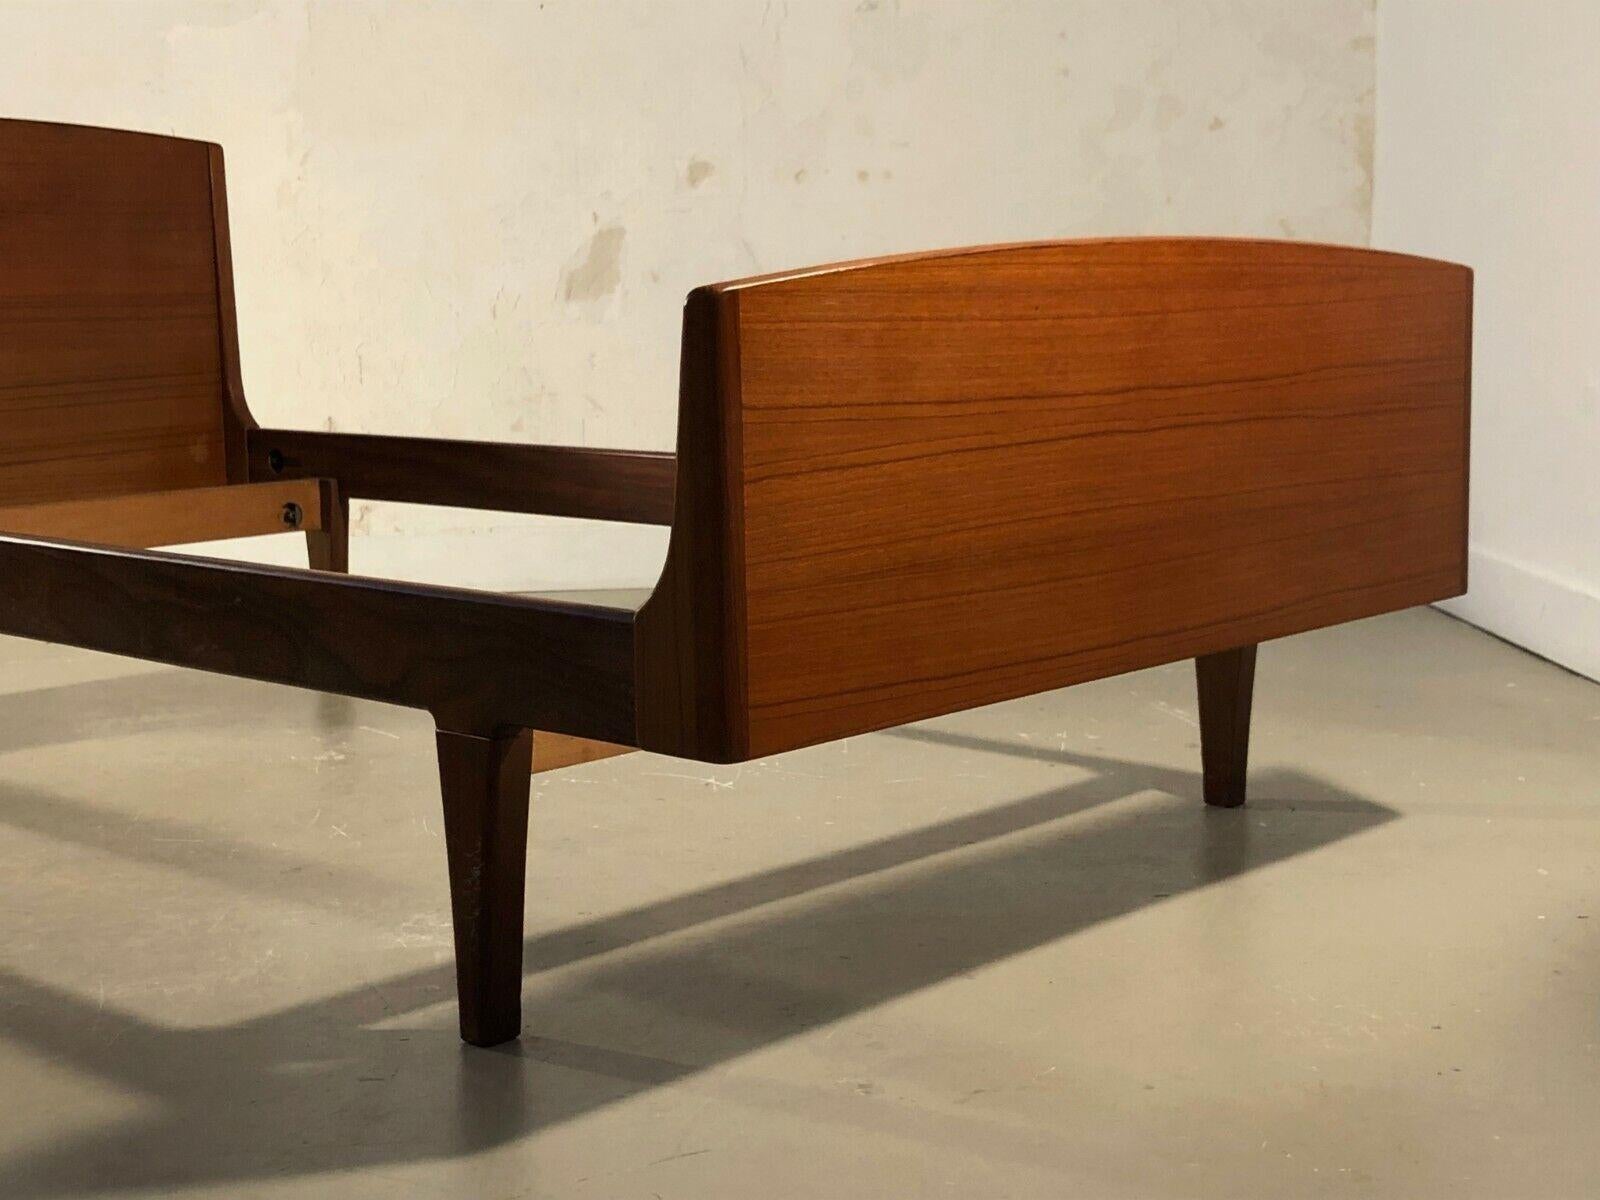 Mahogany A MID-CENTURY-MODERN RECONSTRUCTION Bed DAYBED by ROGER LANDAULT, France, 1950 For Sale